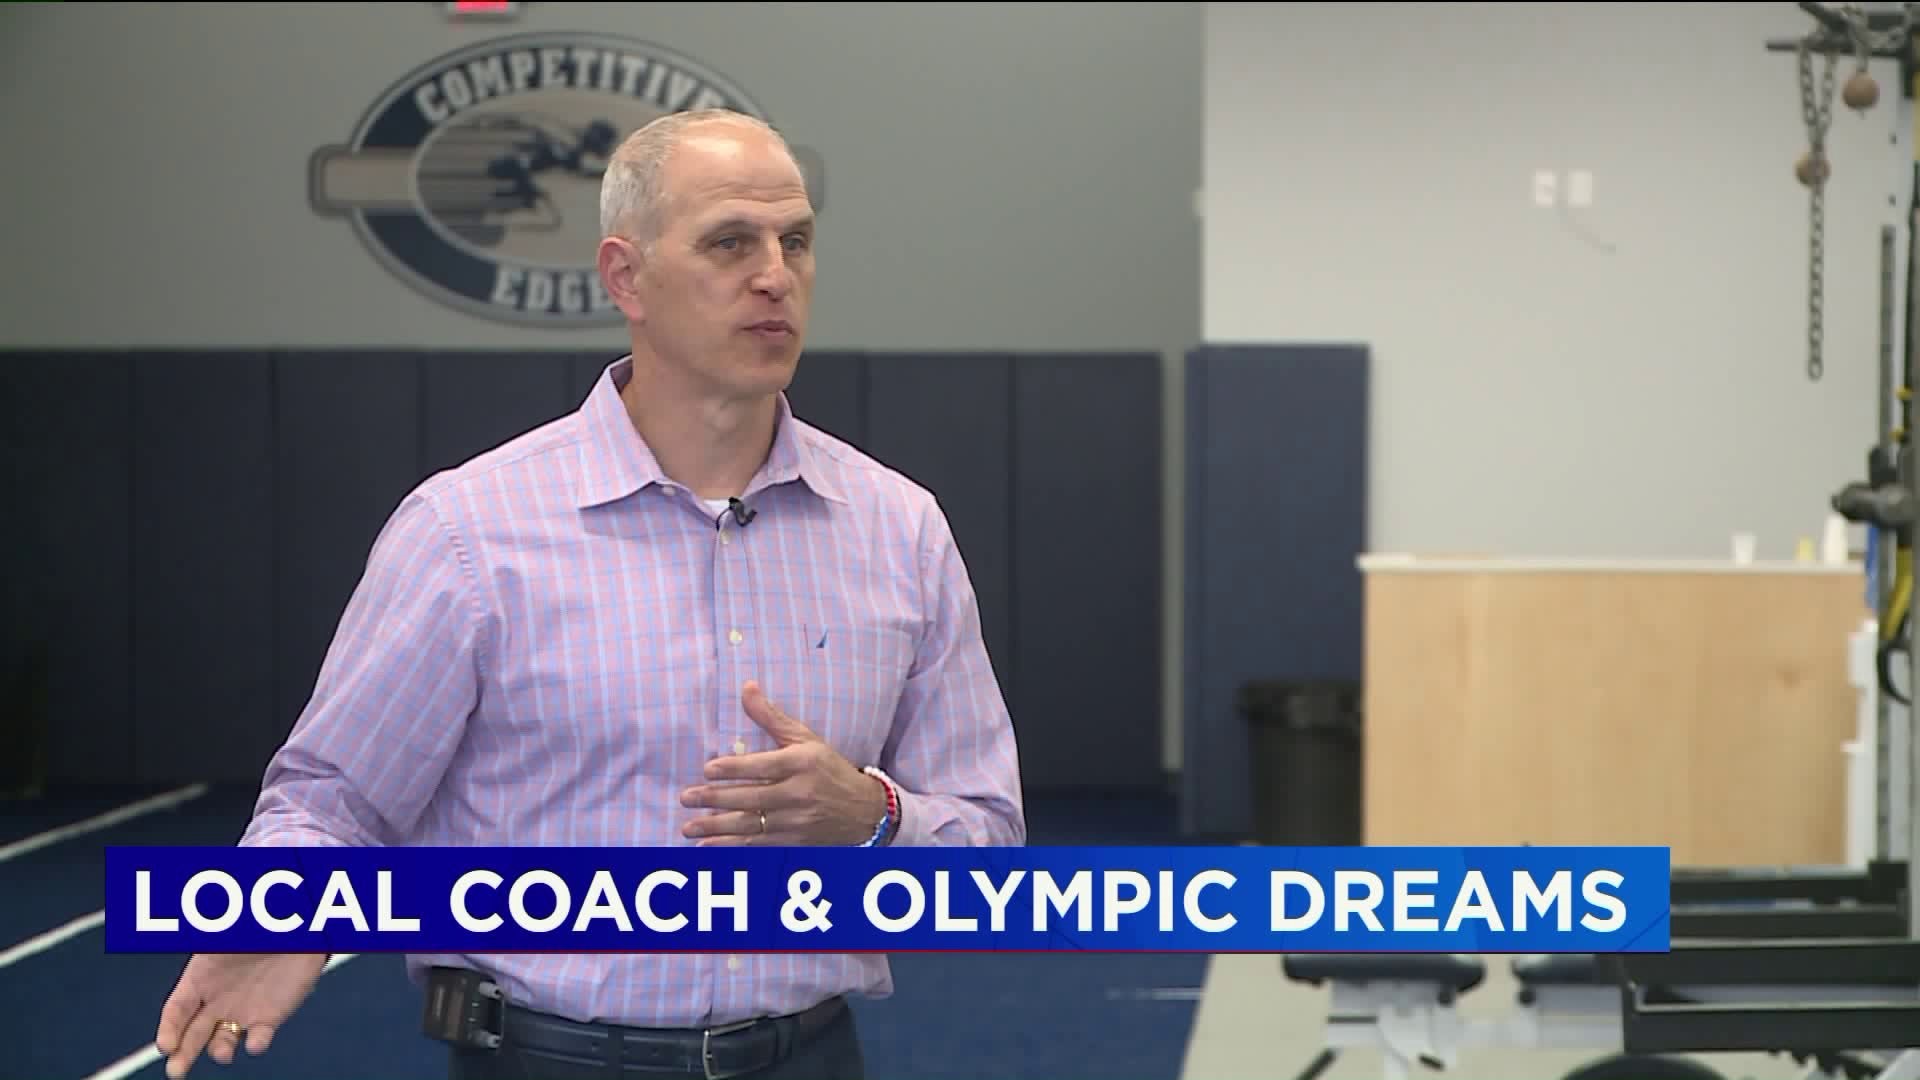 Local coach and olympic dreams